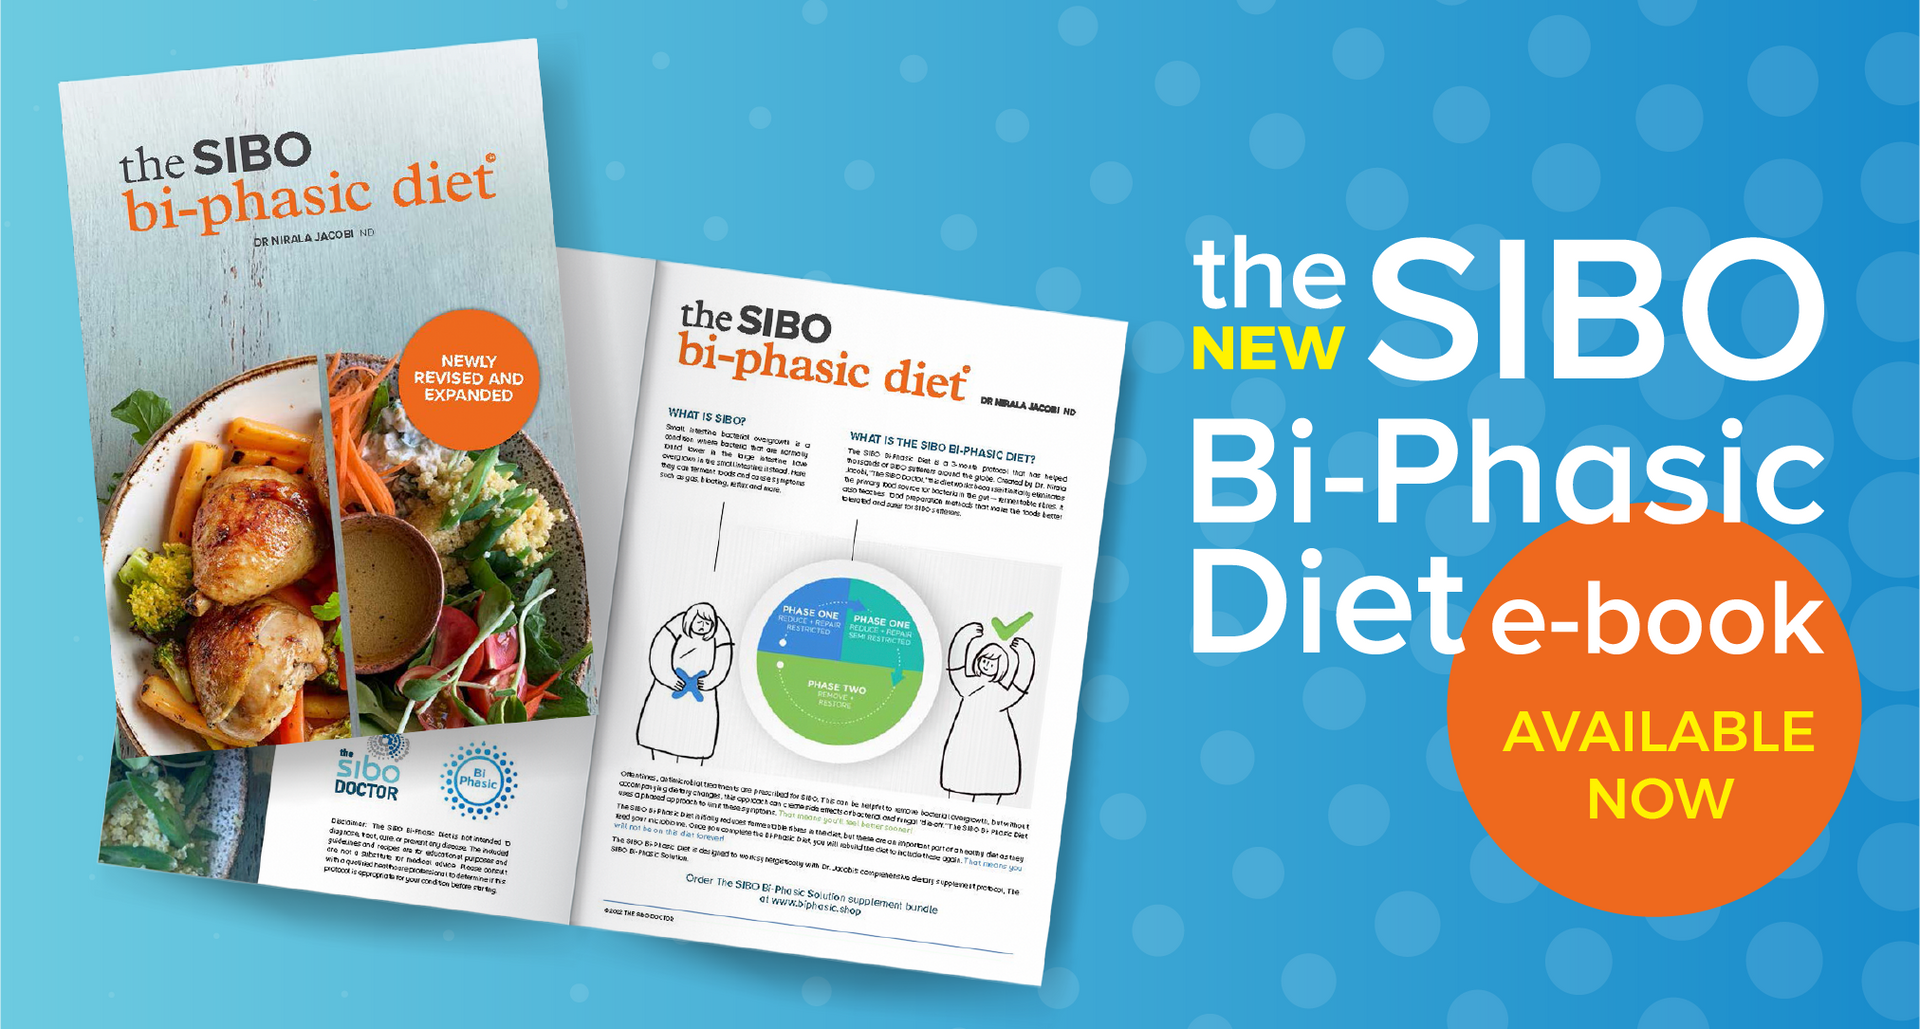 Load video: THE SIBO BI-PHASIC DIET - NOW AVAILABLE ON THESIBODOCTOR.COM